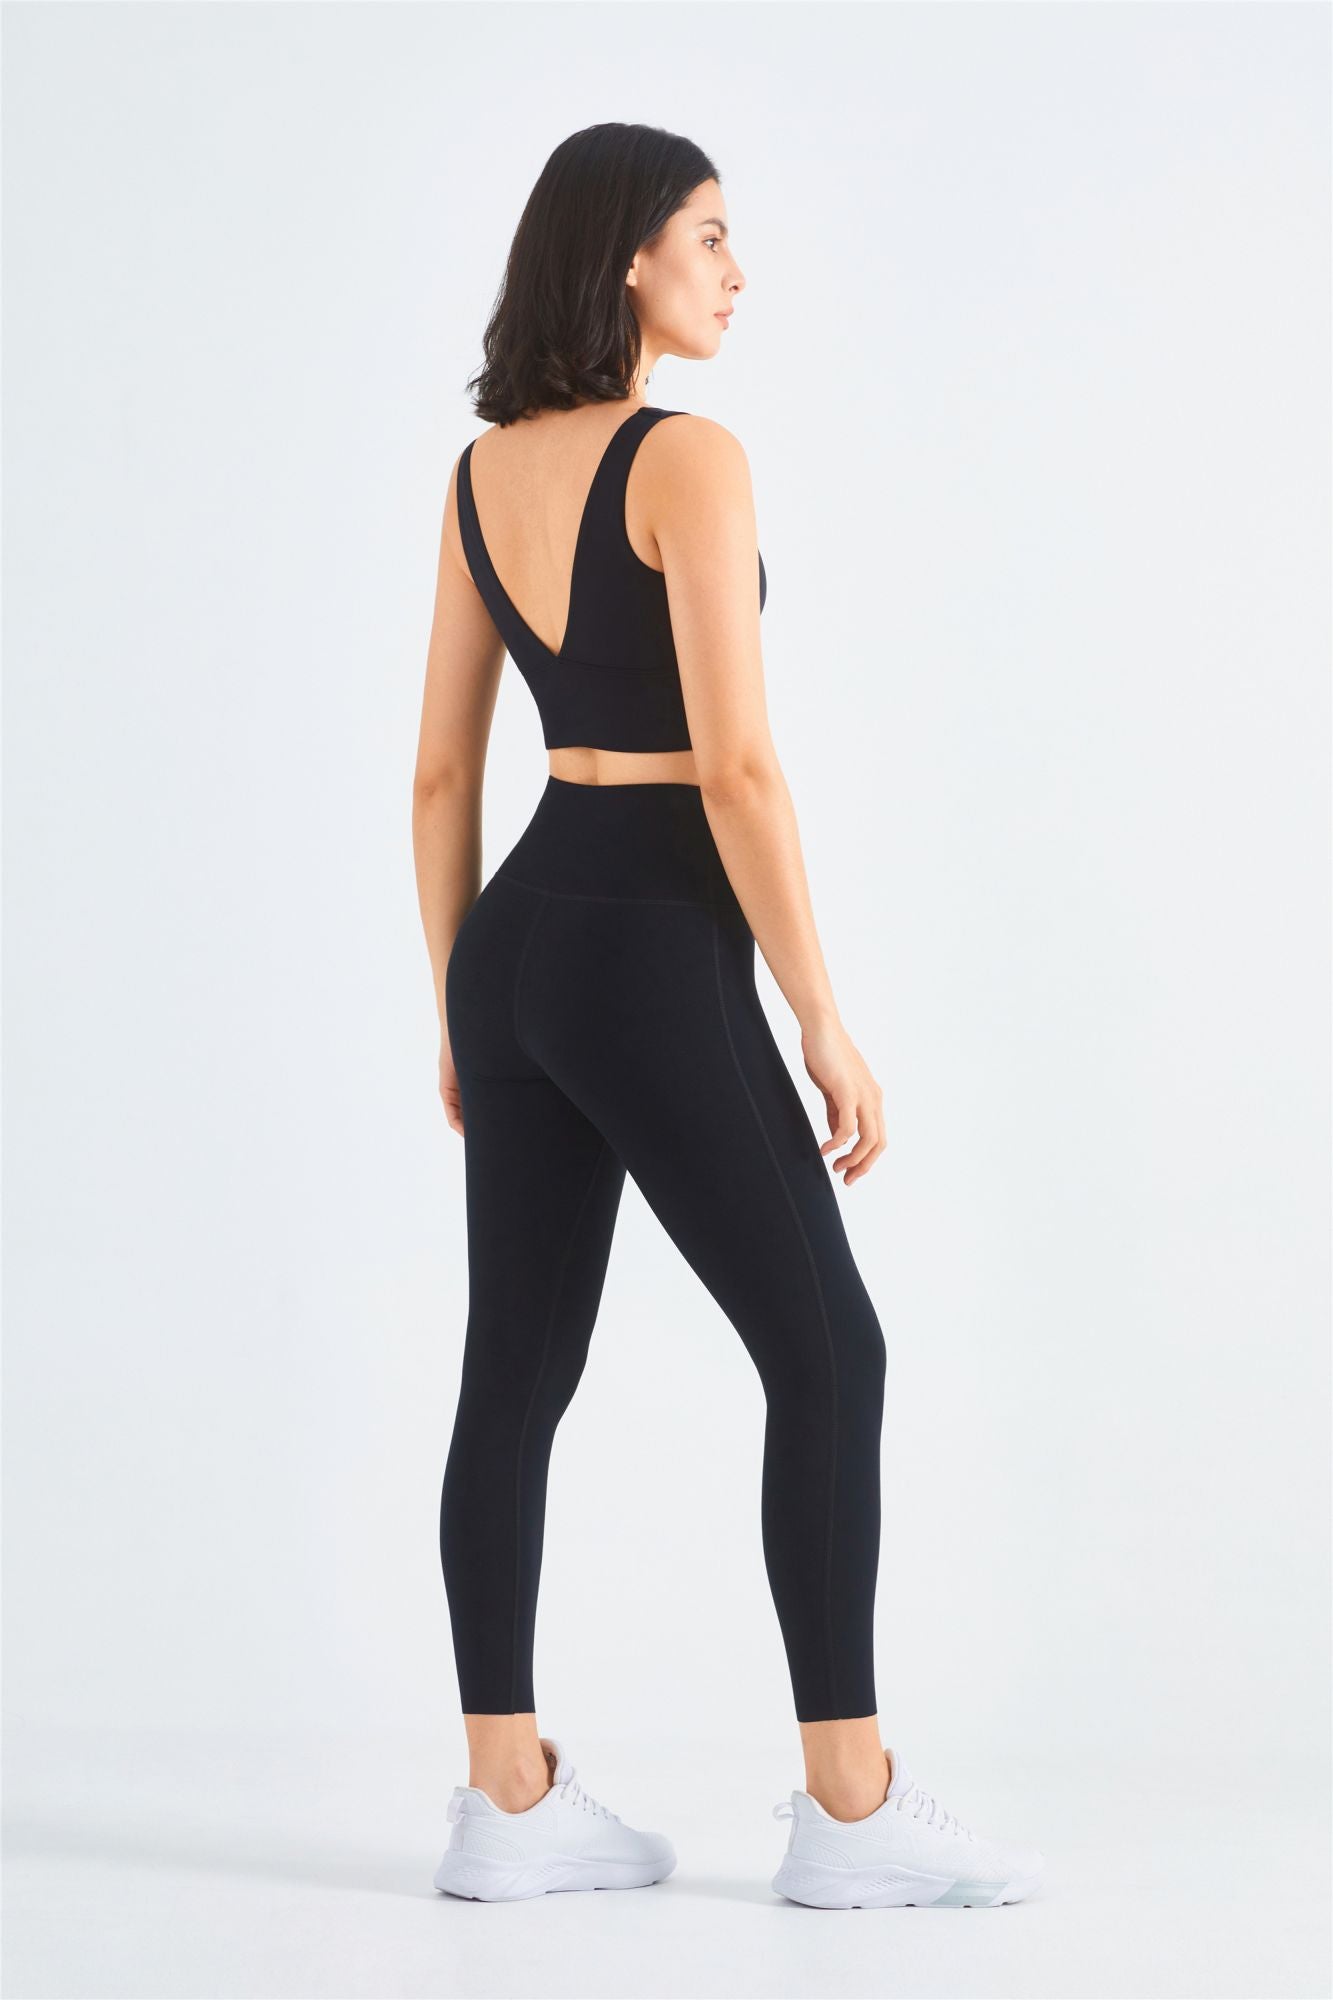 Backless Sports Bra and Workout Leggings Women Activewear Set – Zioccie